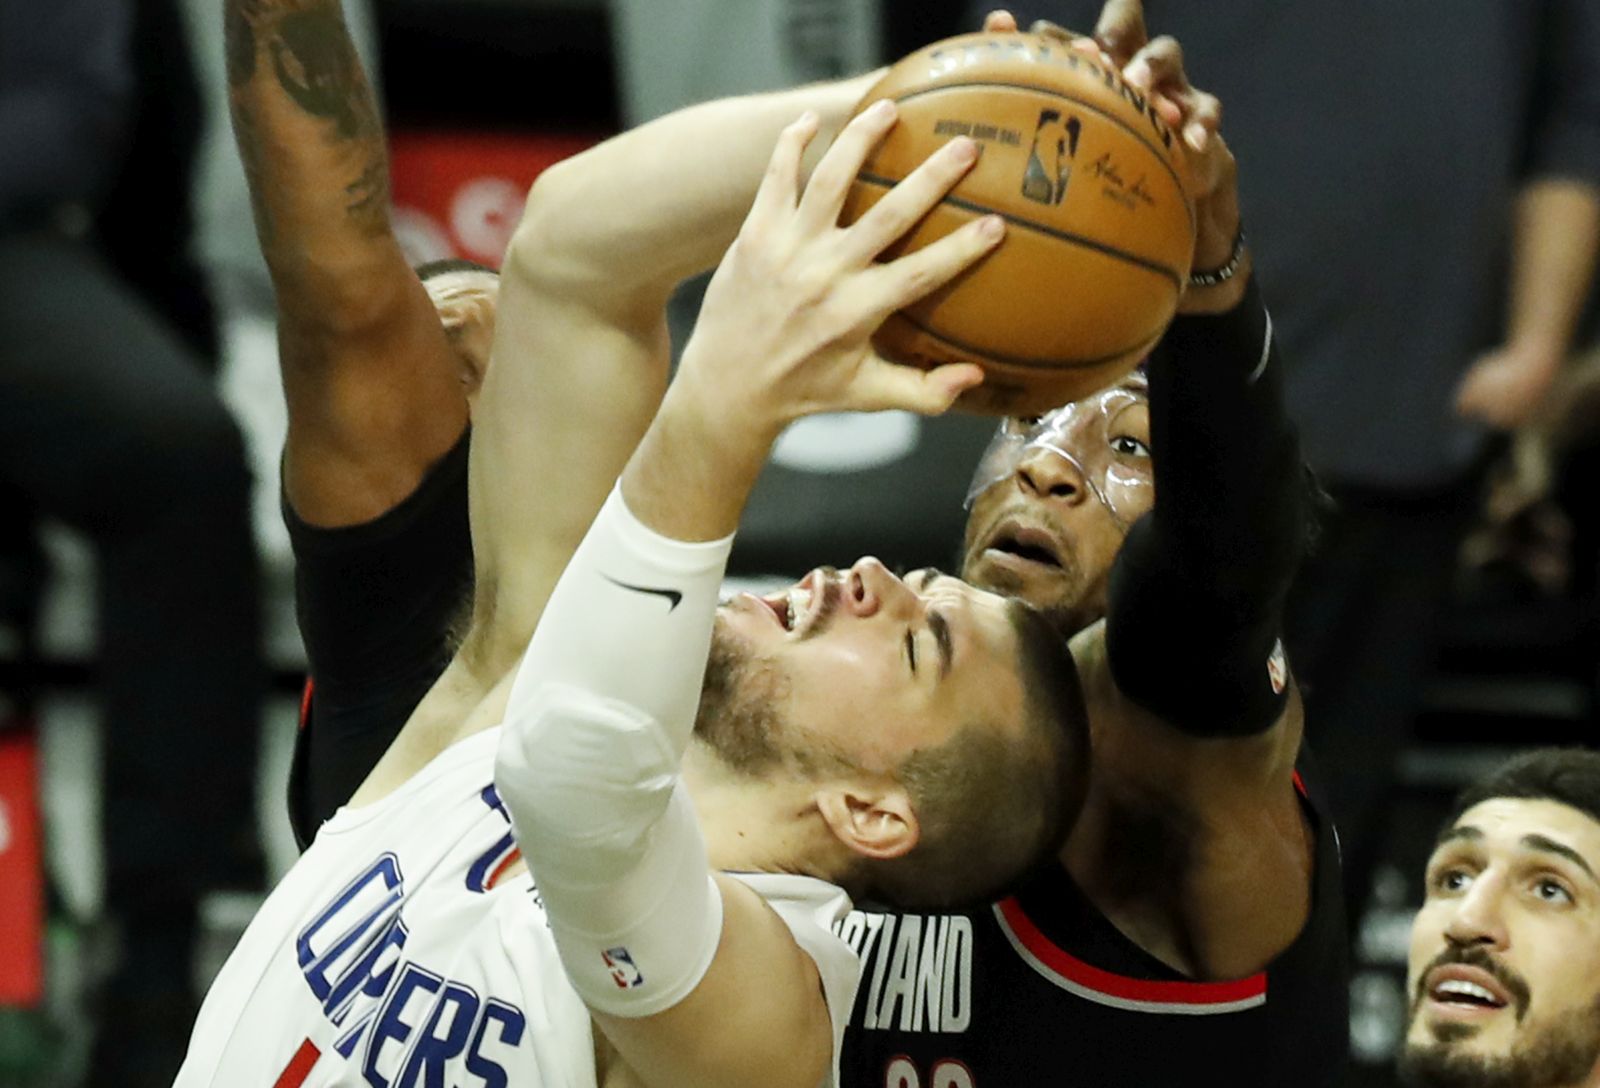 epa09119711 LA Clippers center Ivica Zubac (L) in action against Portland Trail Blazers forward Robert Covington (C) during the NBA basketball game between Portland Trail Blazers and Los Angeles Clippers at the Staples Center in Los Angeles, California, USA, 06 April 2021.  EPA/ETIENNE LAURENT SHUTTERSTOCK OUT